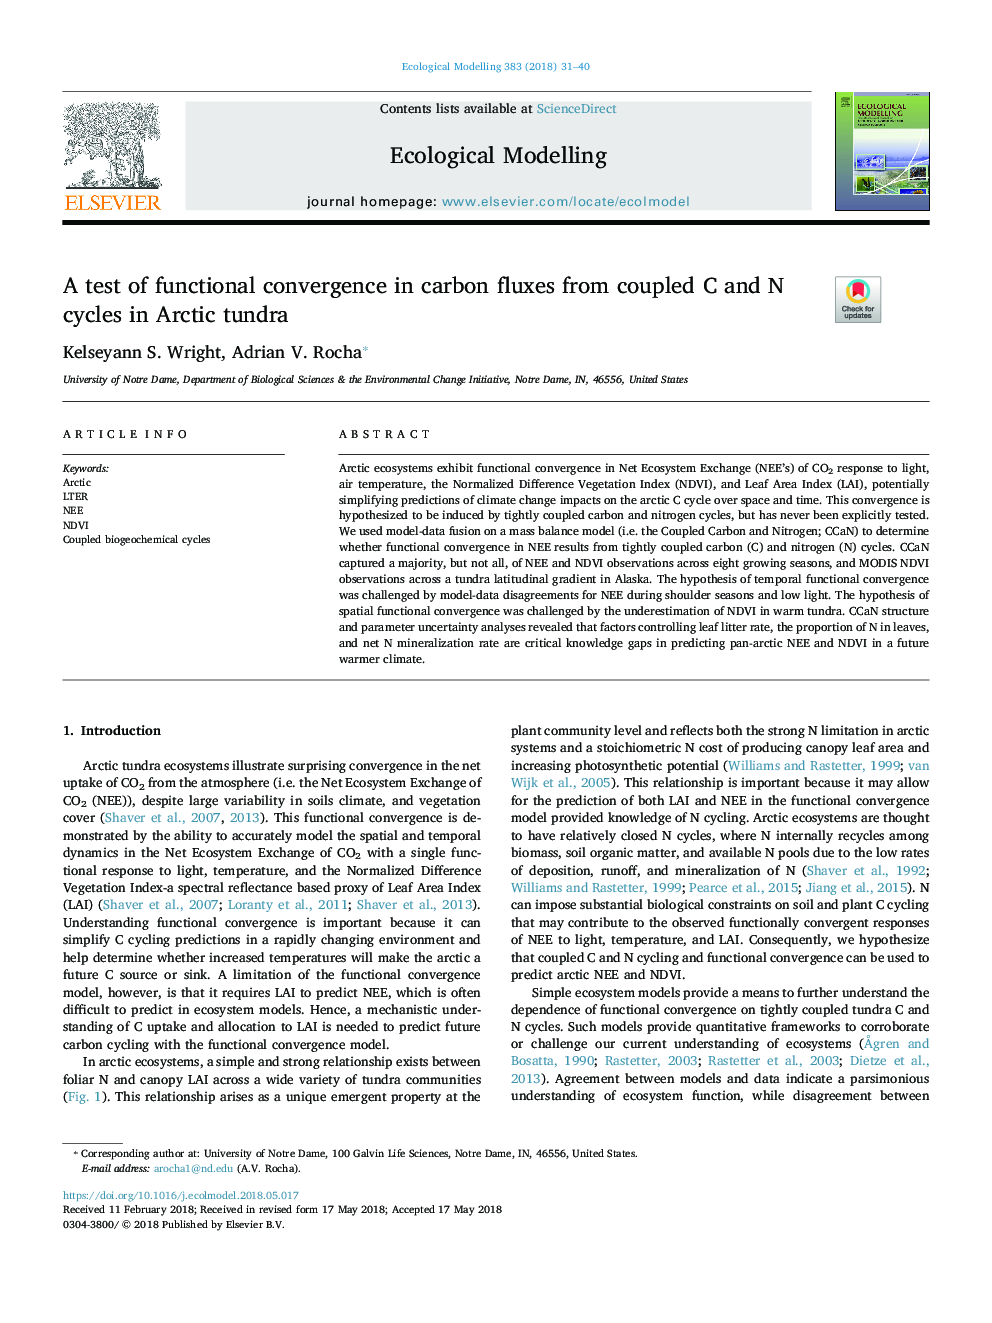 A test of functional convergence in carbon fluxes from coupled C and N cycles in Arctic tundra